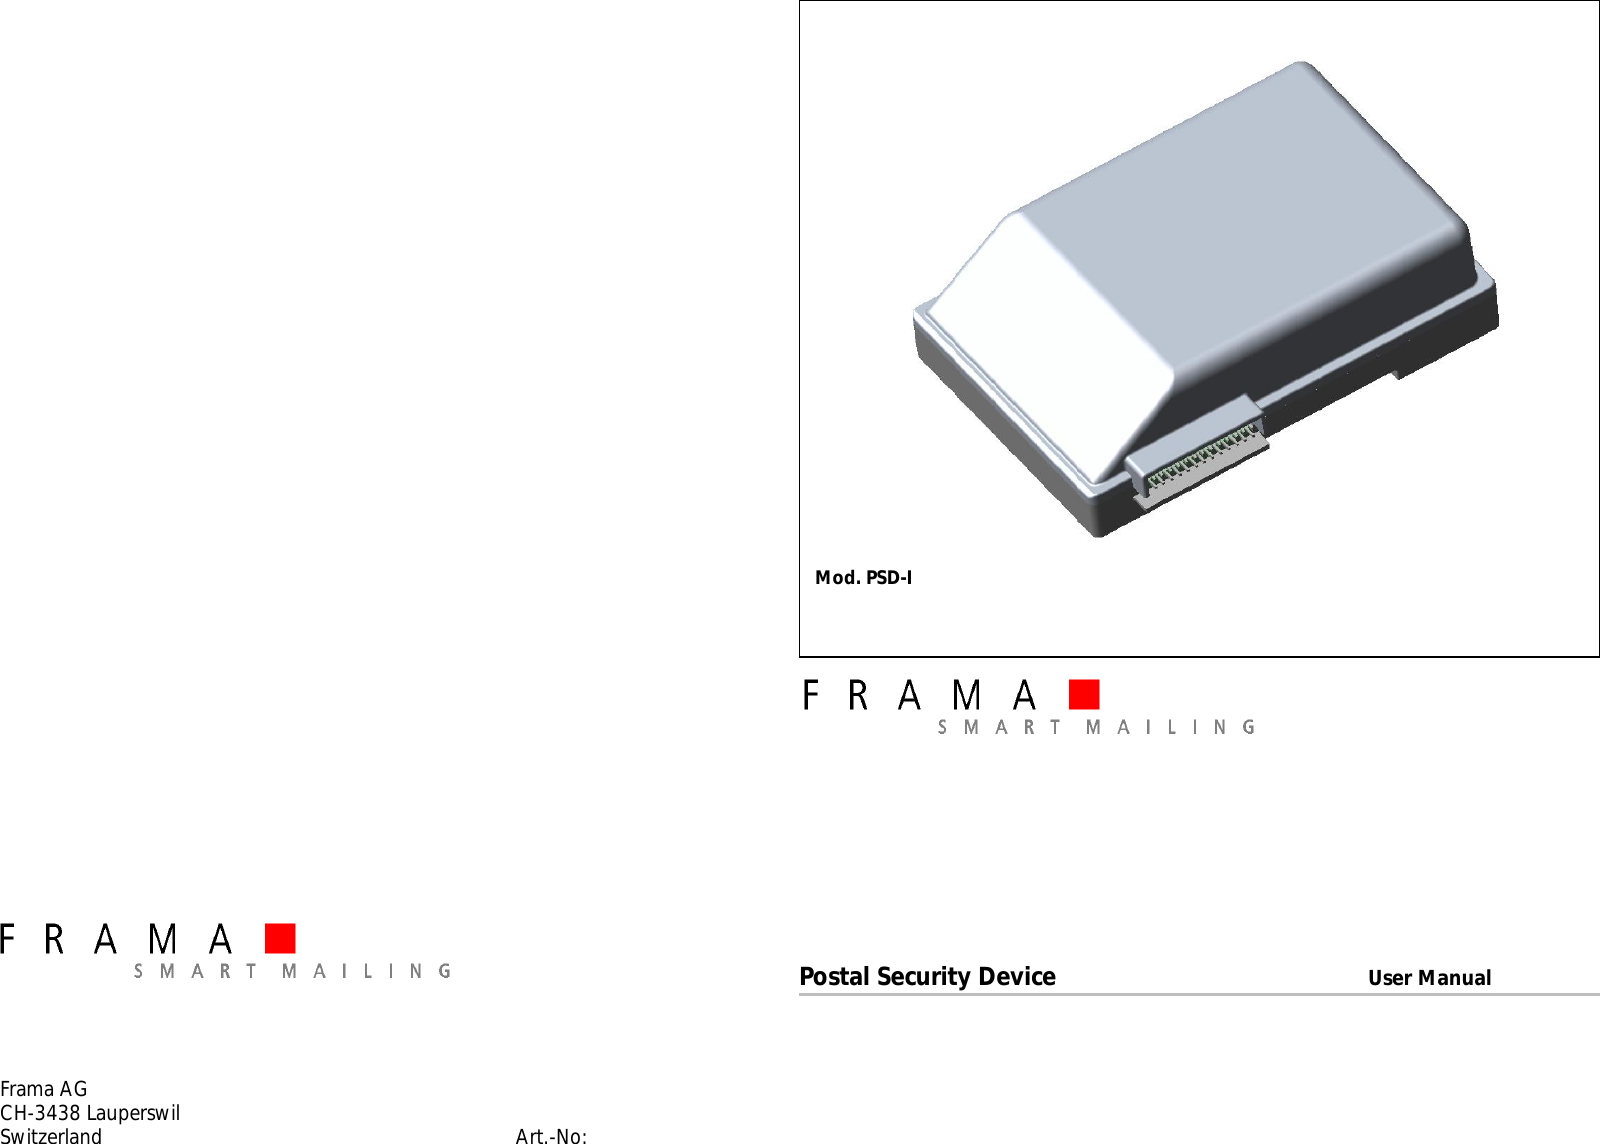                                Frama AG CH-3438 Lauperswil Switzerland      Art.-No:                                Postal Security Device     User Manual           Mod. PSD-I 